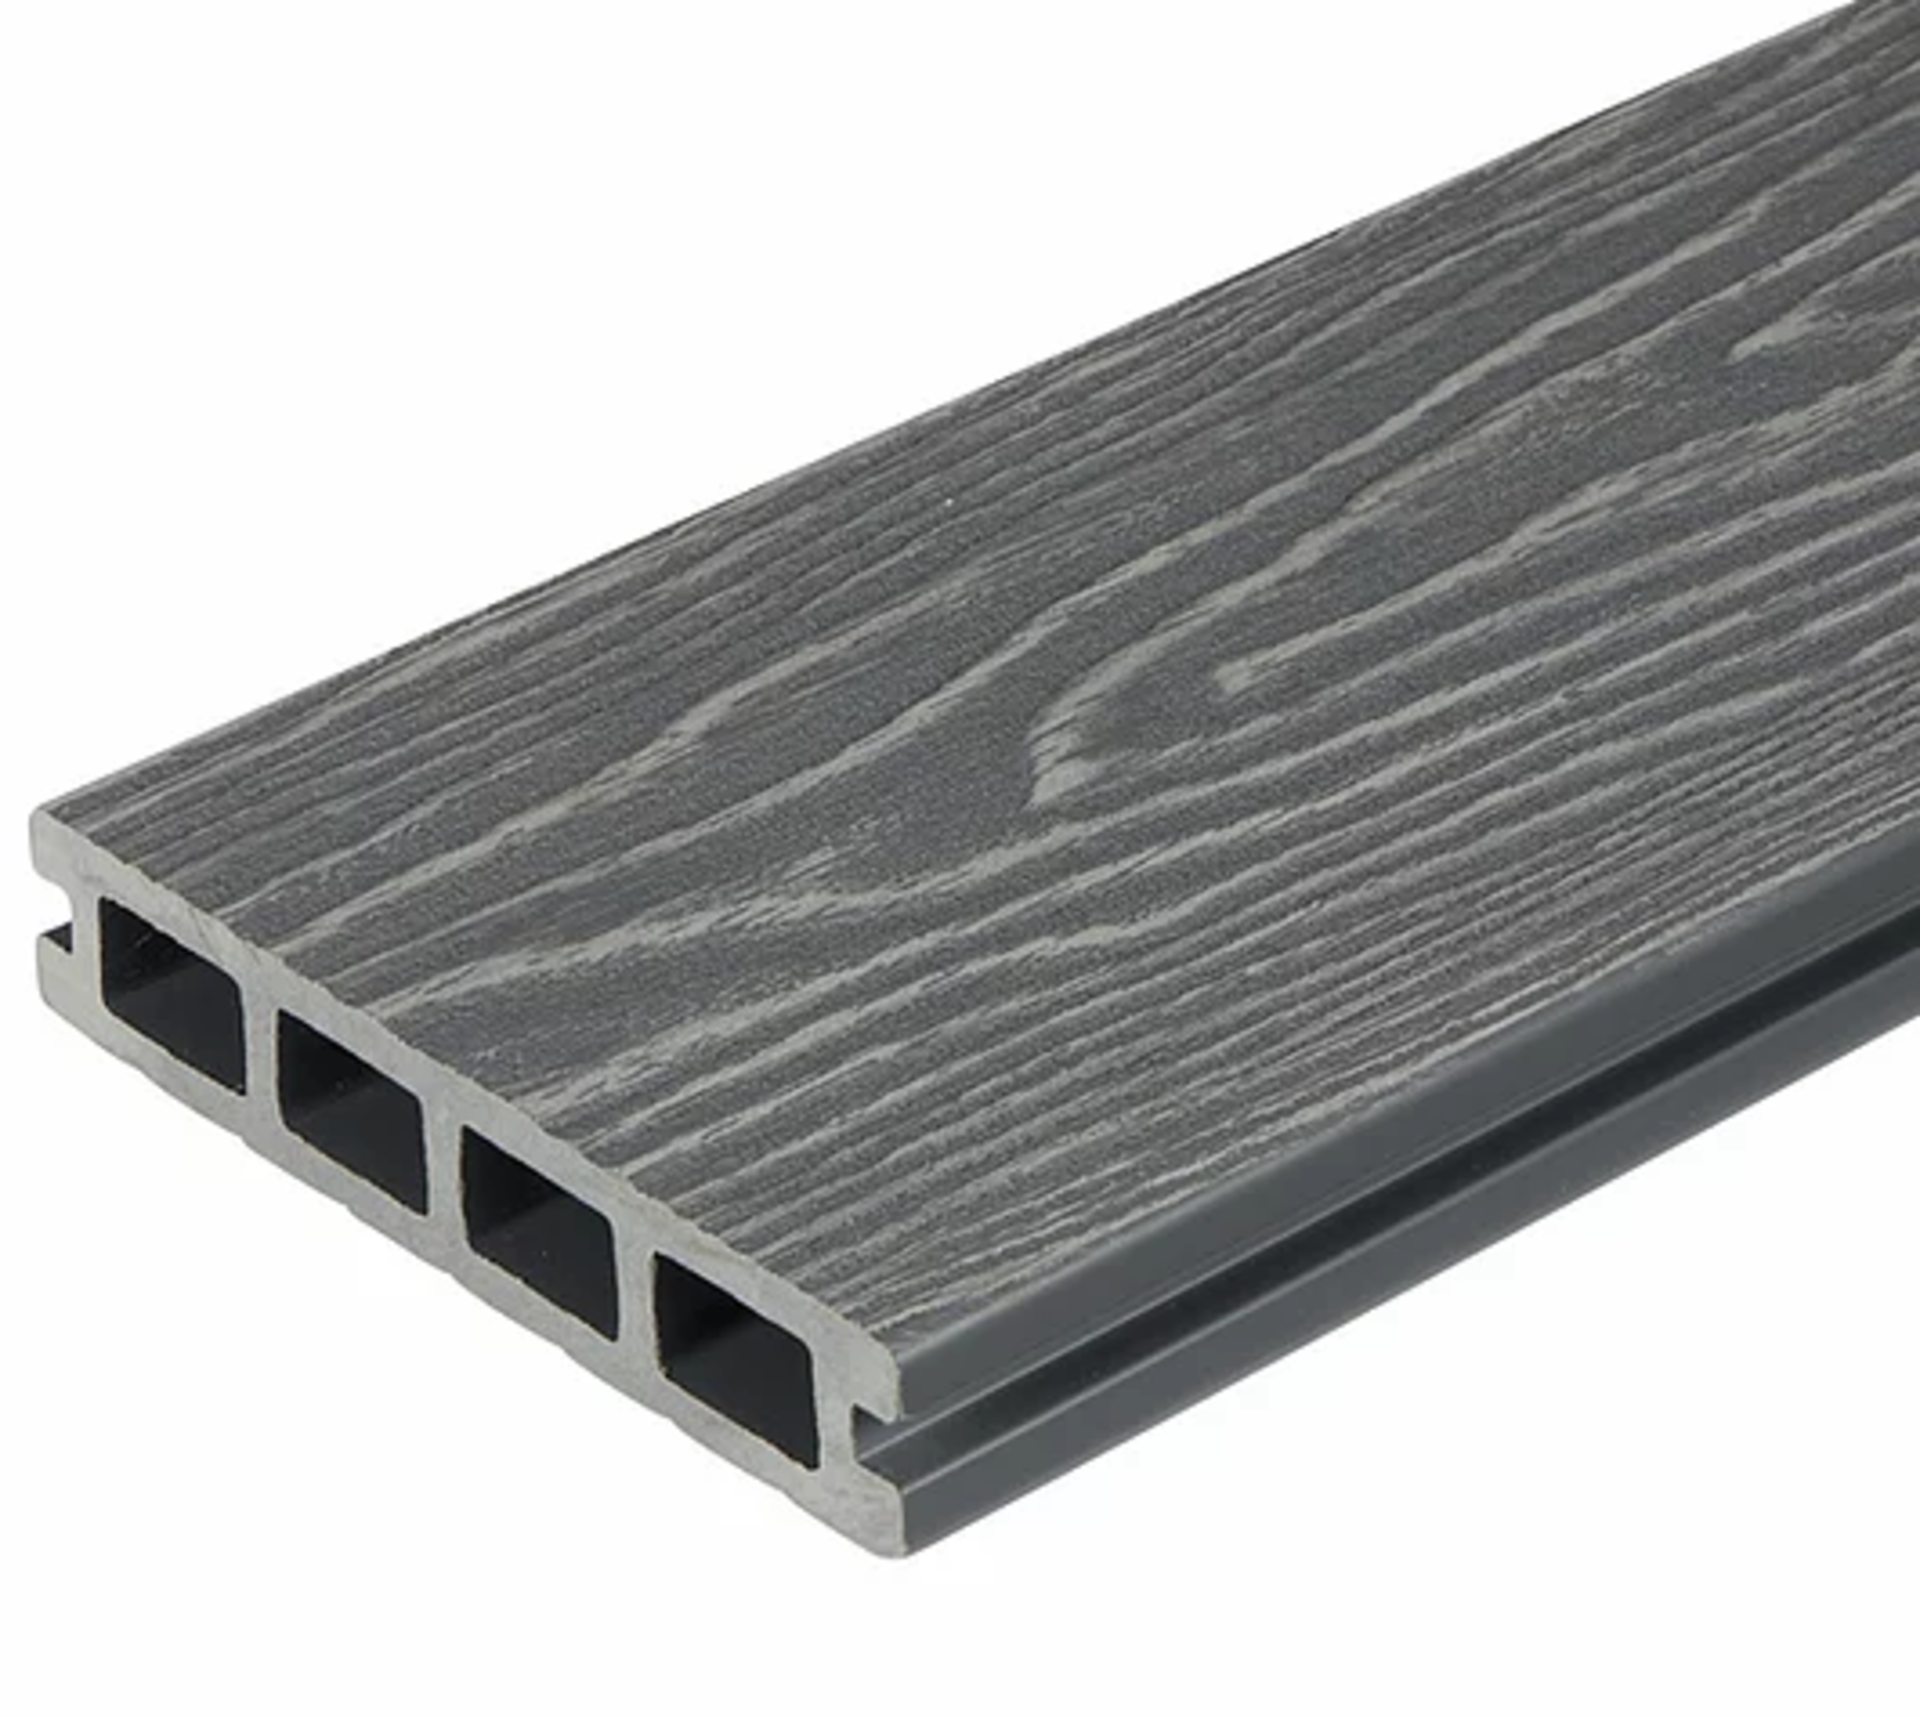 * 20 WPC Composite Light Grey Double sided Embossed Woodgrain Decking Boards 2900mm x 146mm x 25mm - Image 4 of 5